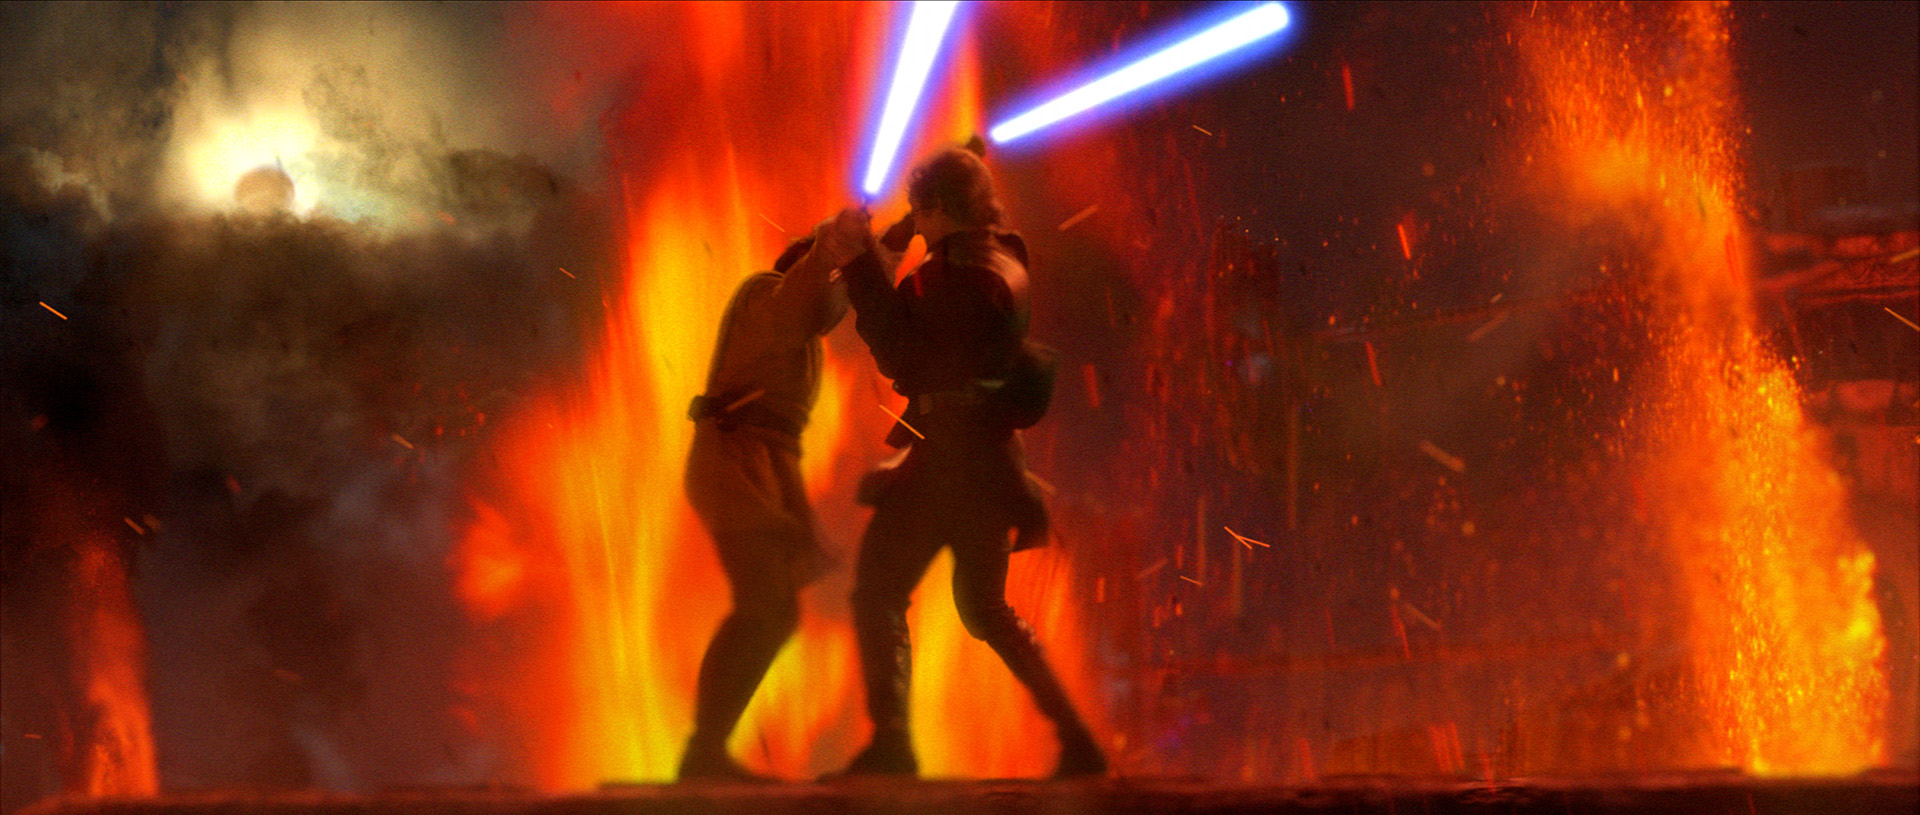 download the new for apple Star Wars Ep. III: Revenge of the Sith